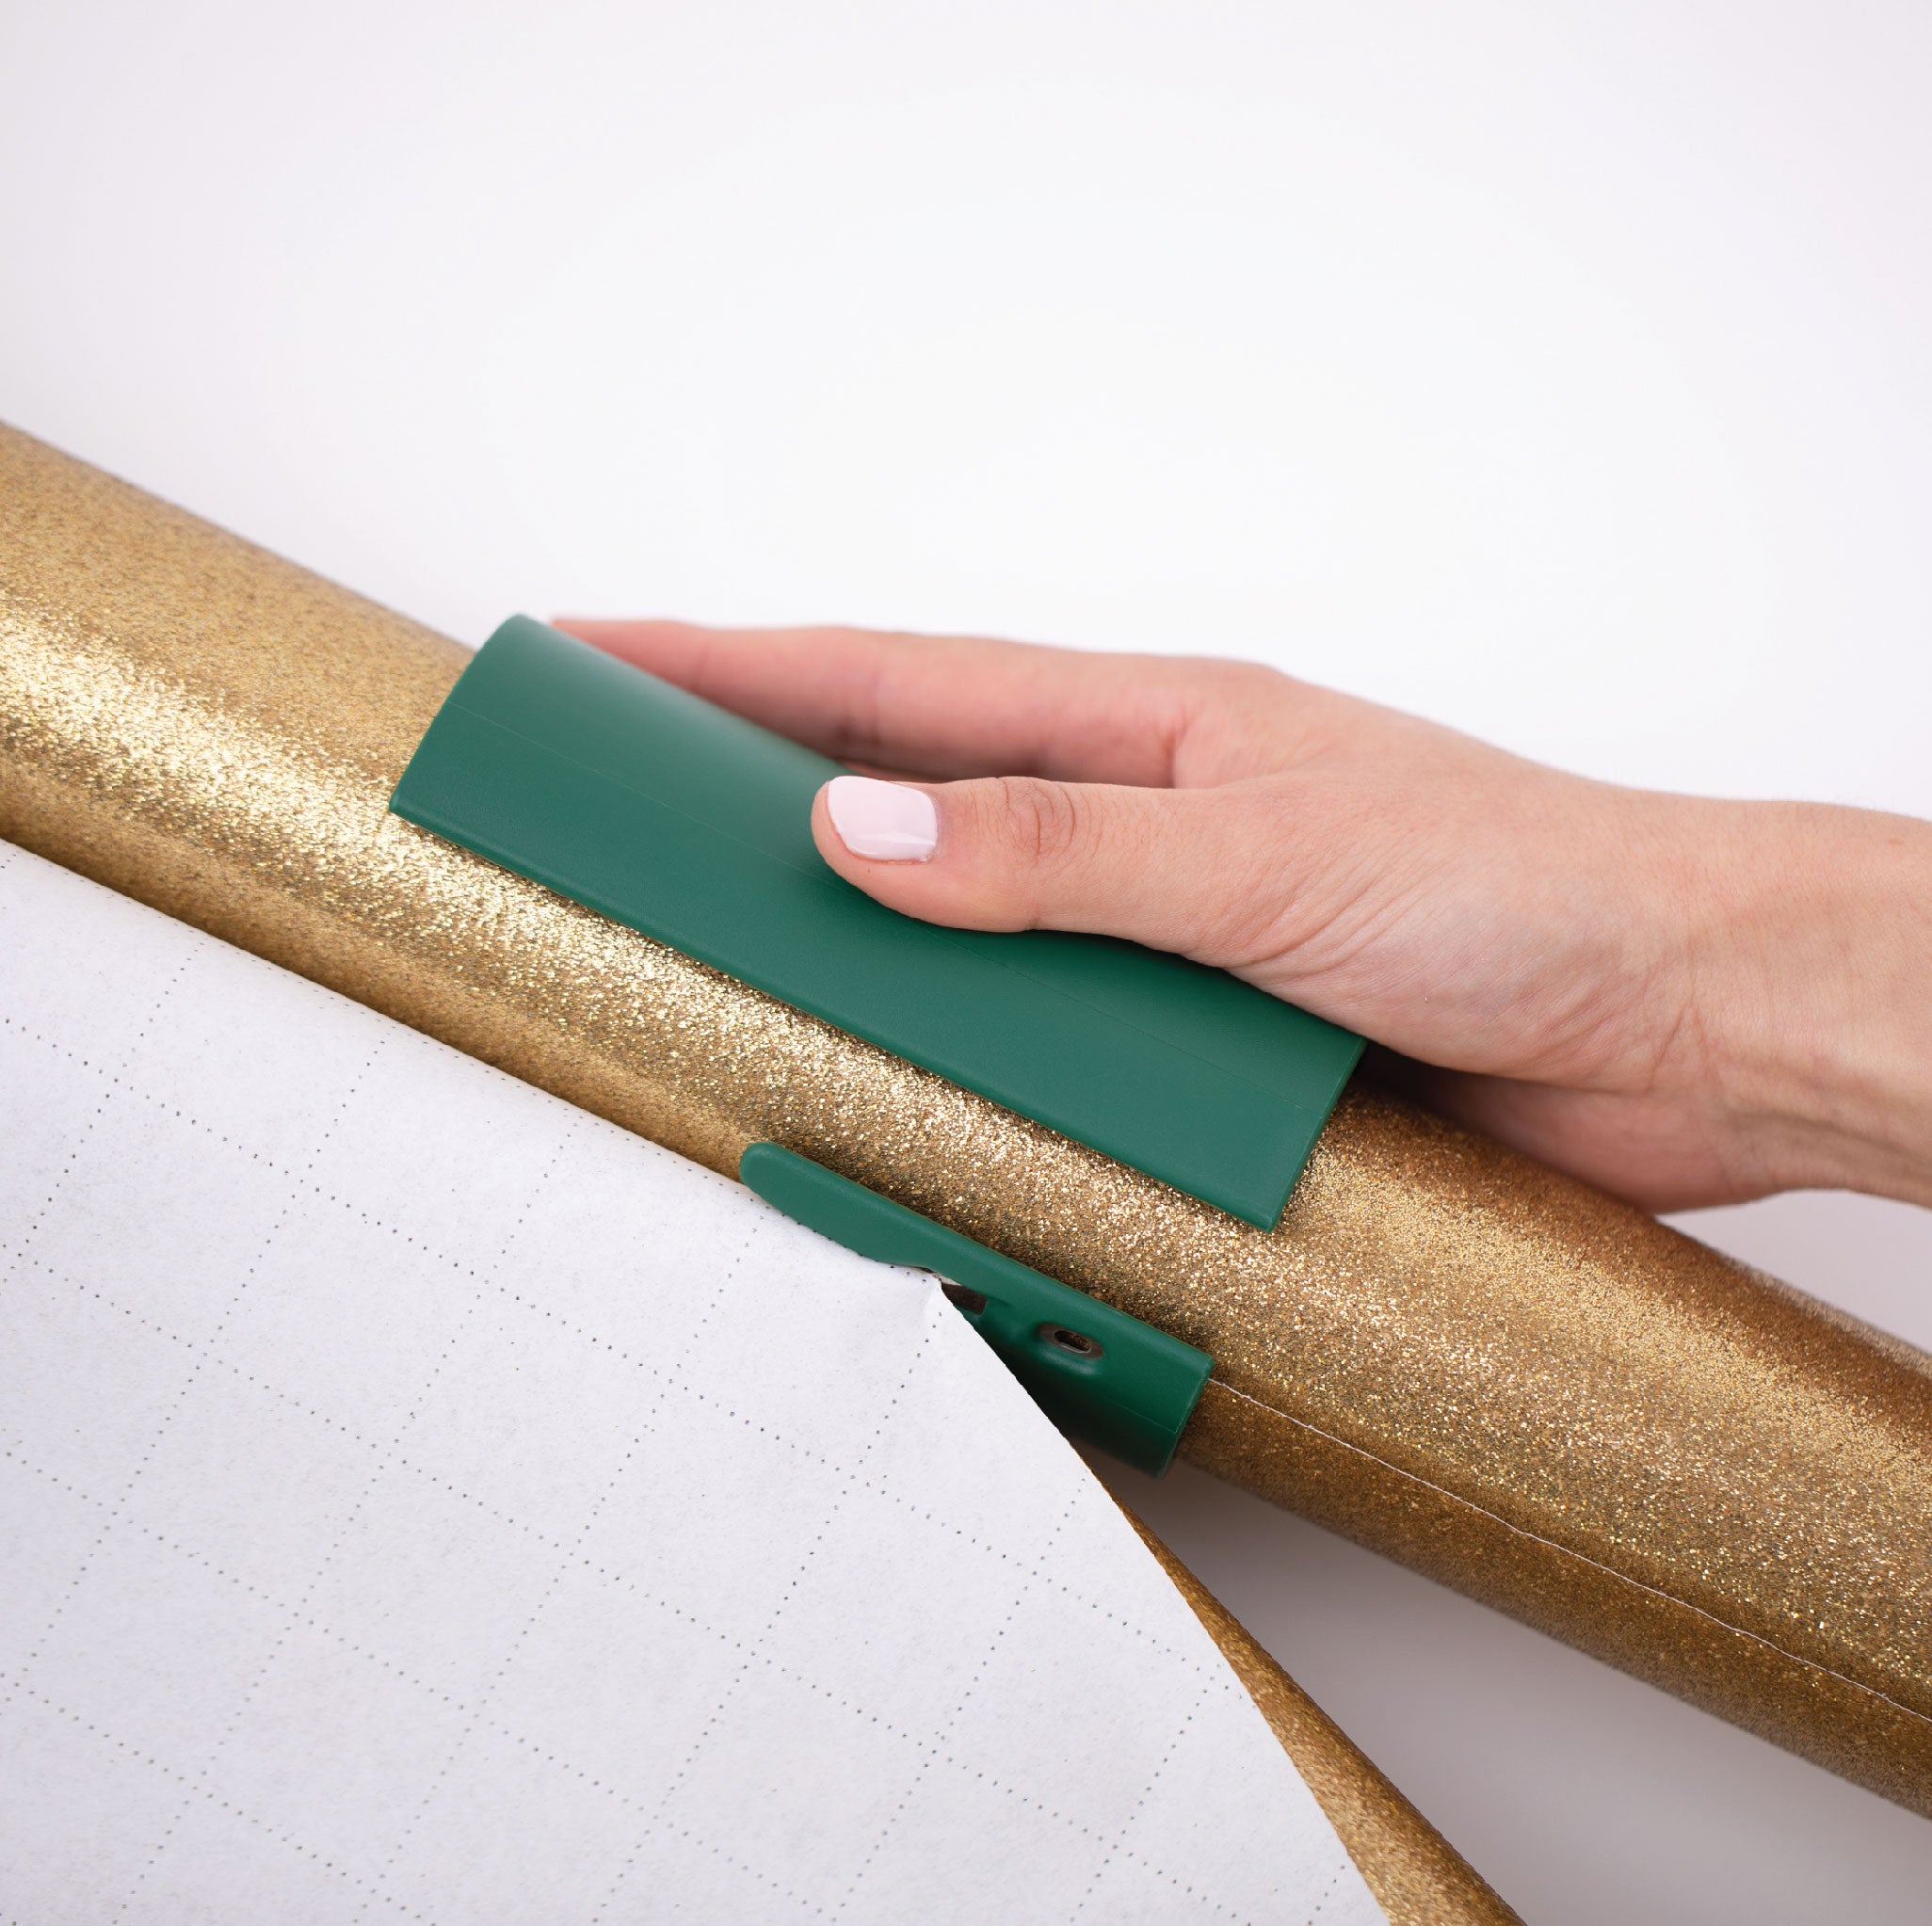 These 5 Tools Make Holiday Gift Wrapping a Breeze